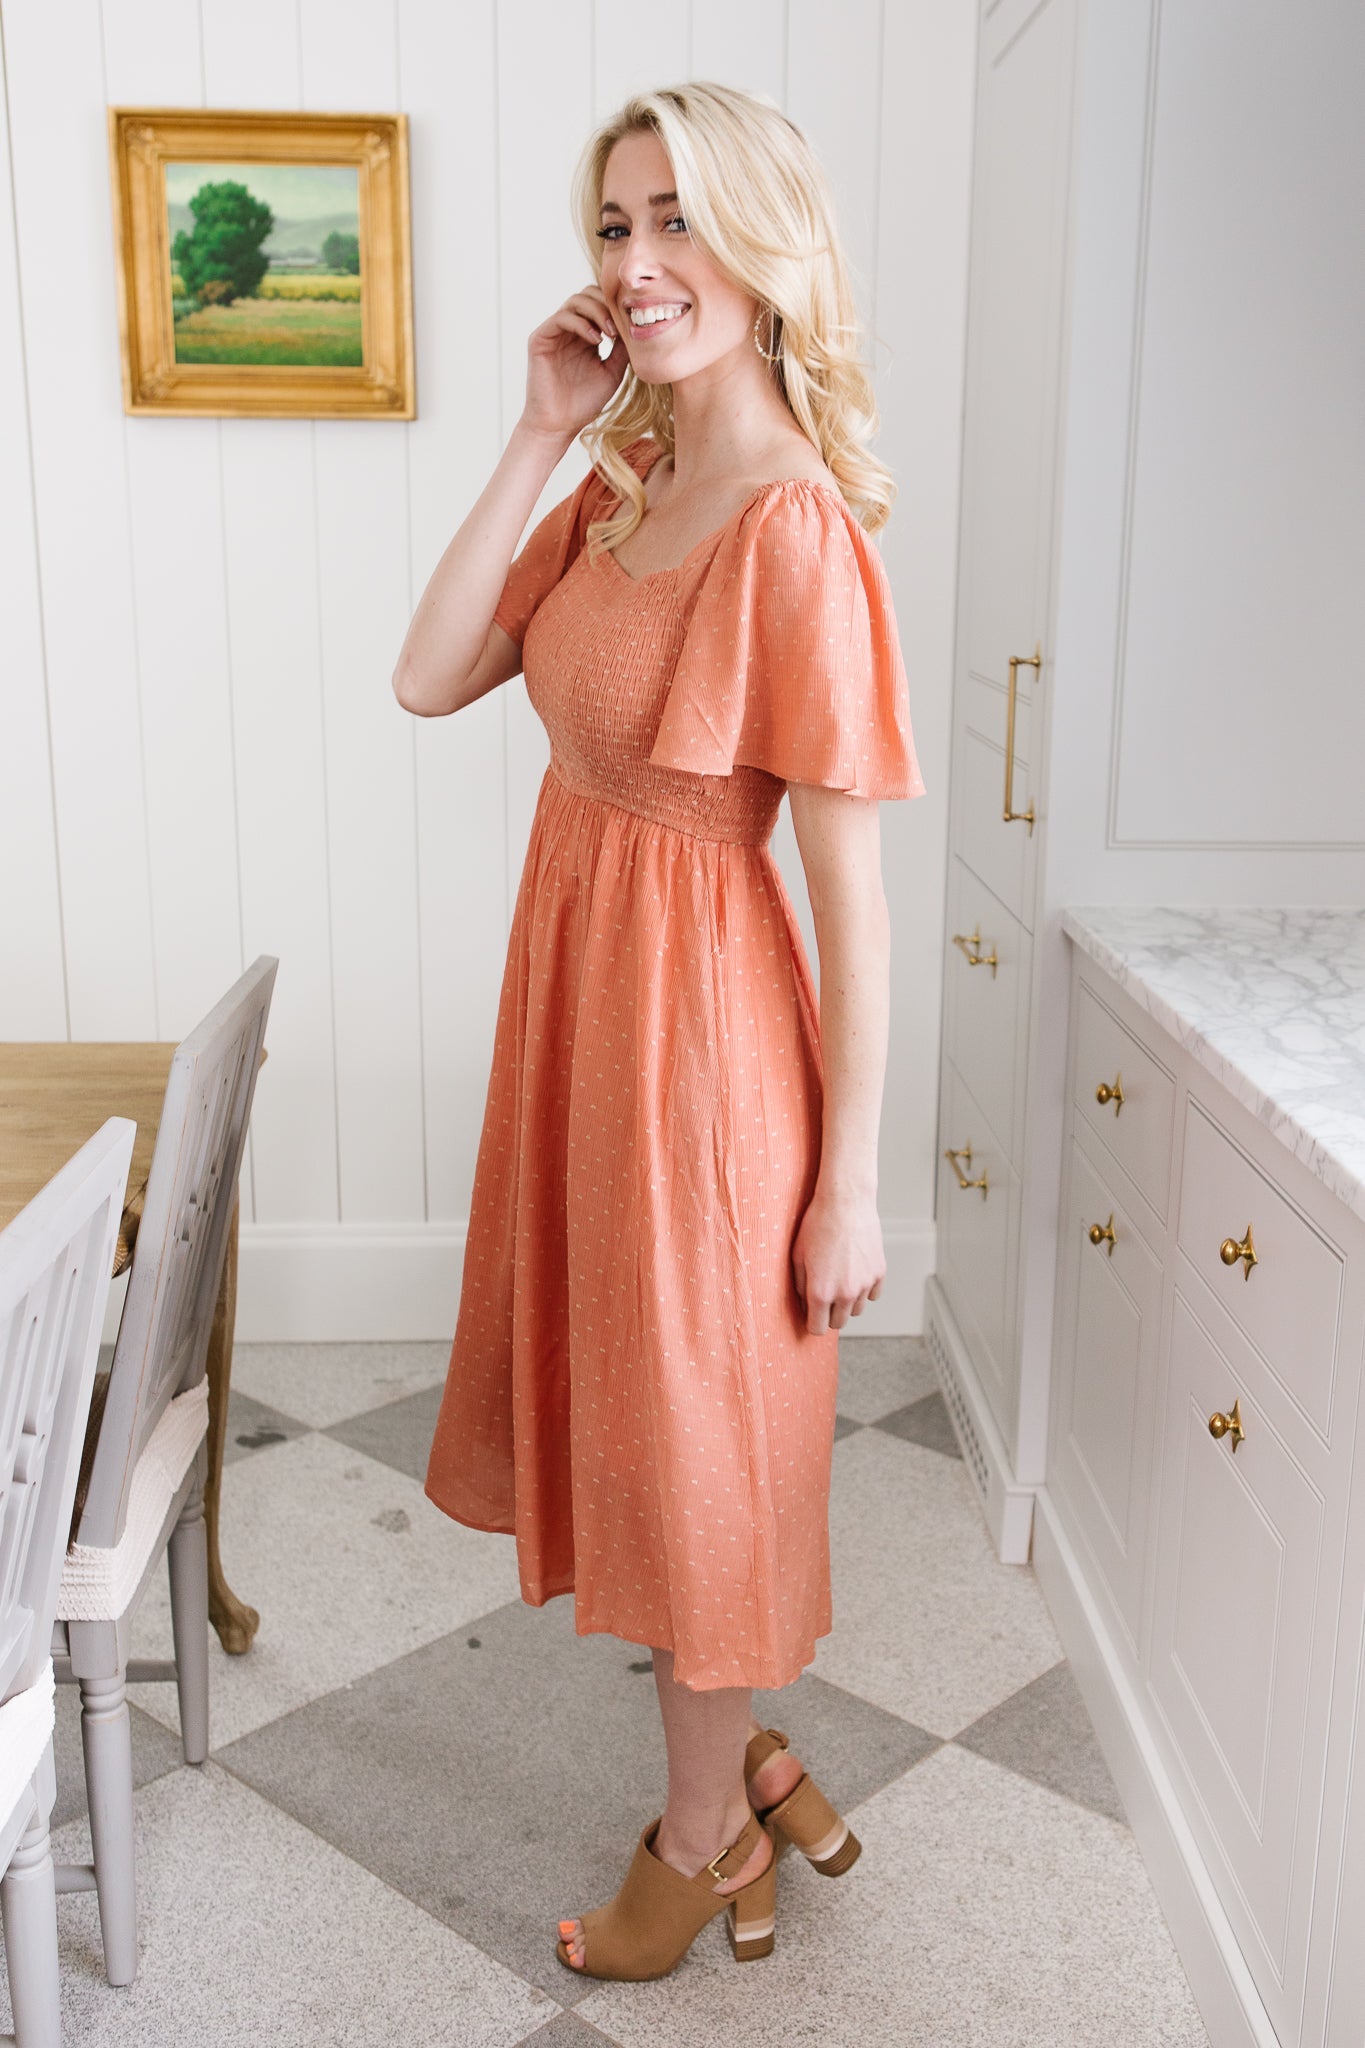 Enchanting Days Ahead Dress Womens Southern Soul Collectives 